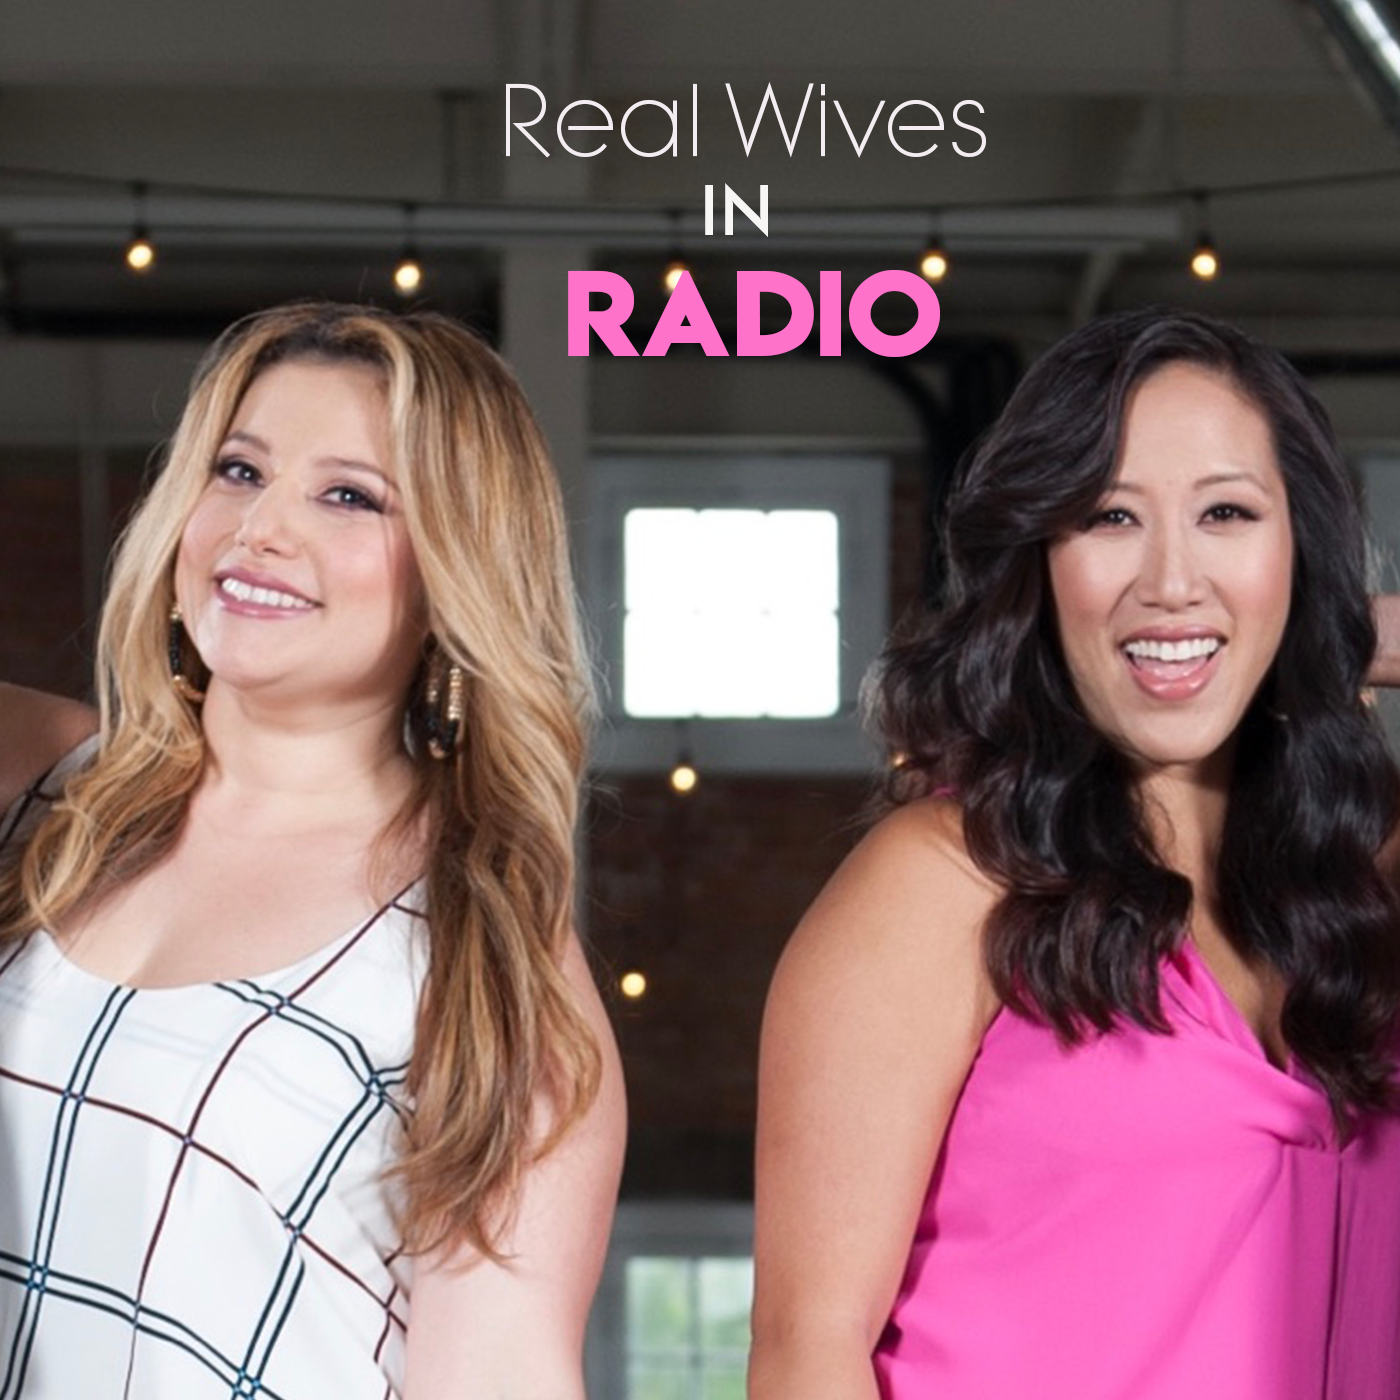 Real Wives in Radio Pilot Episode